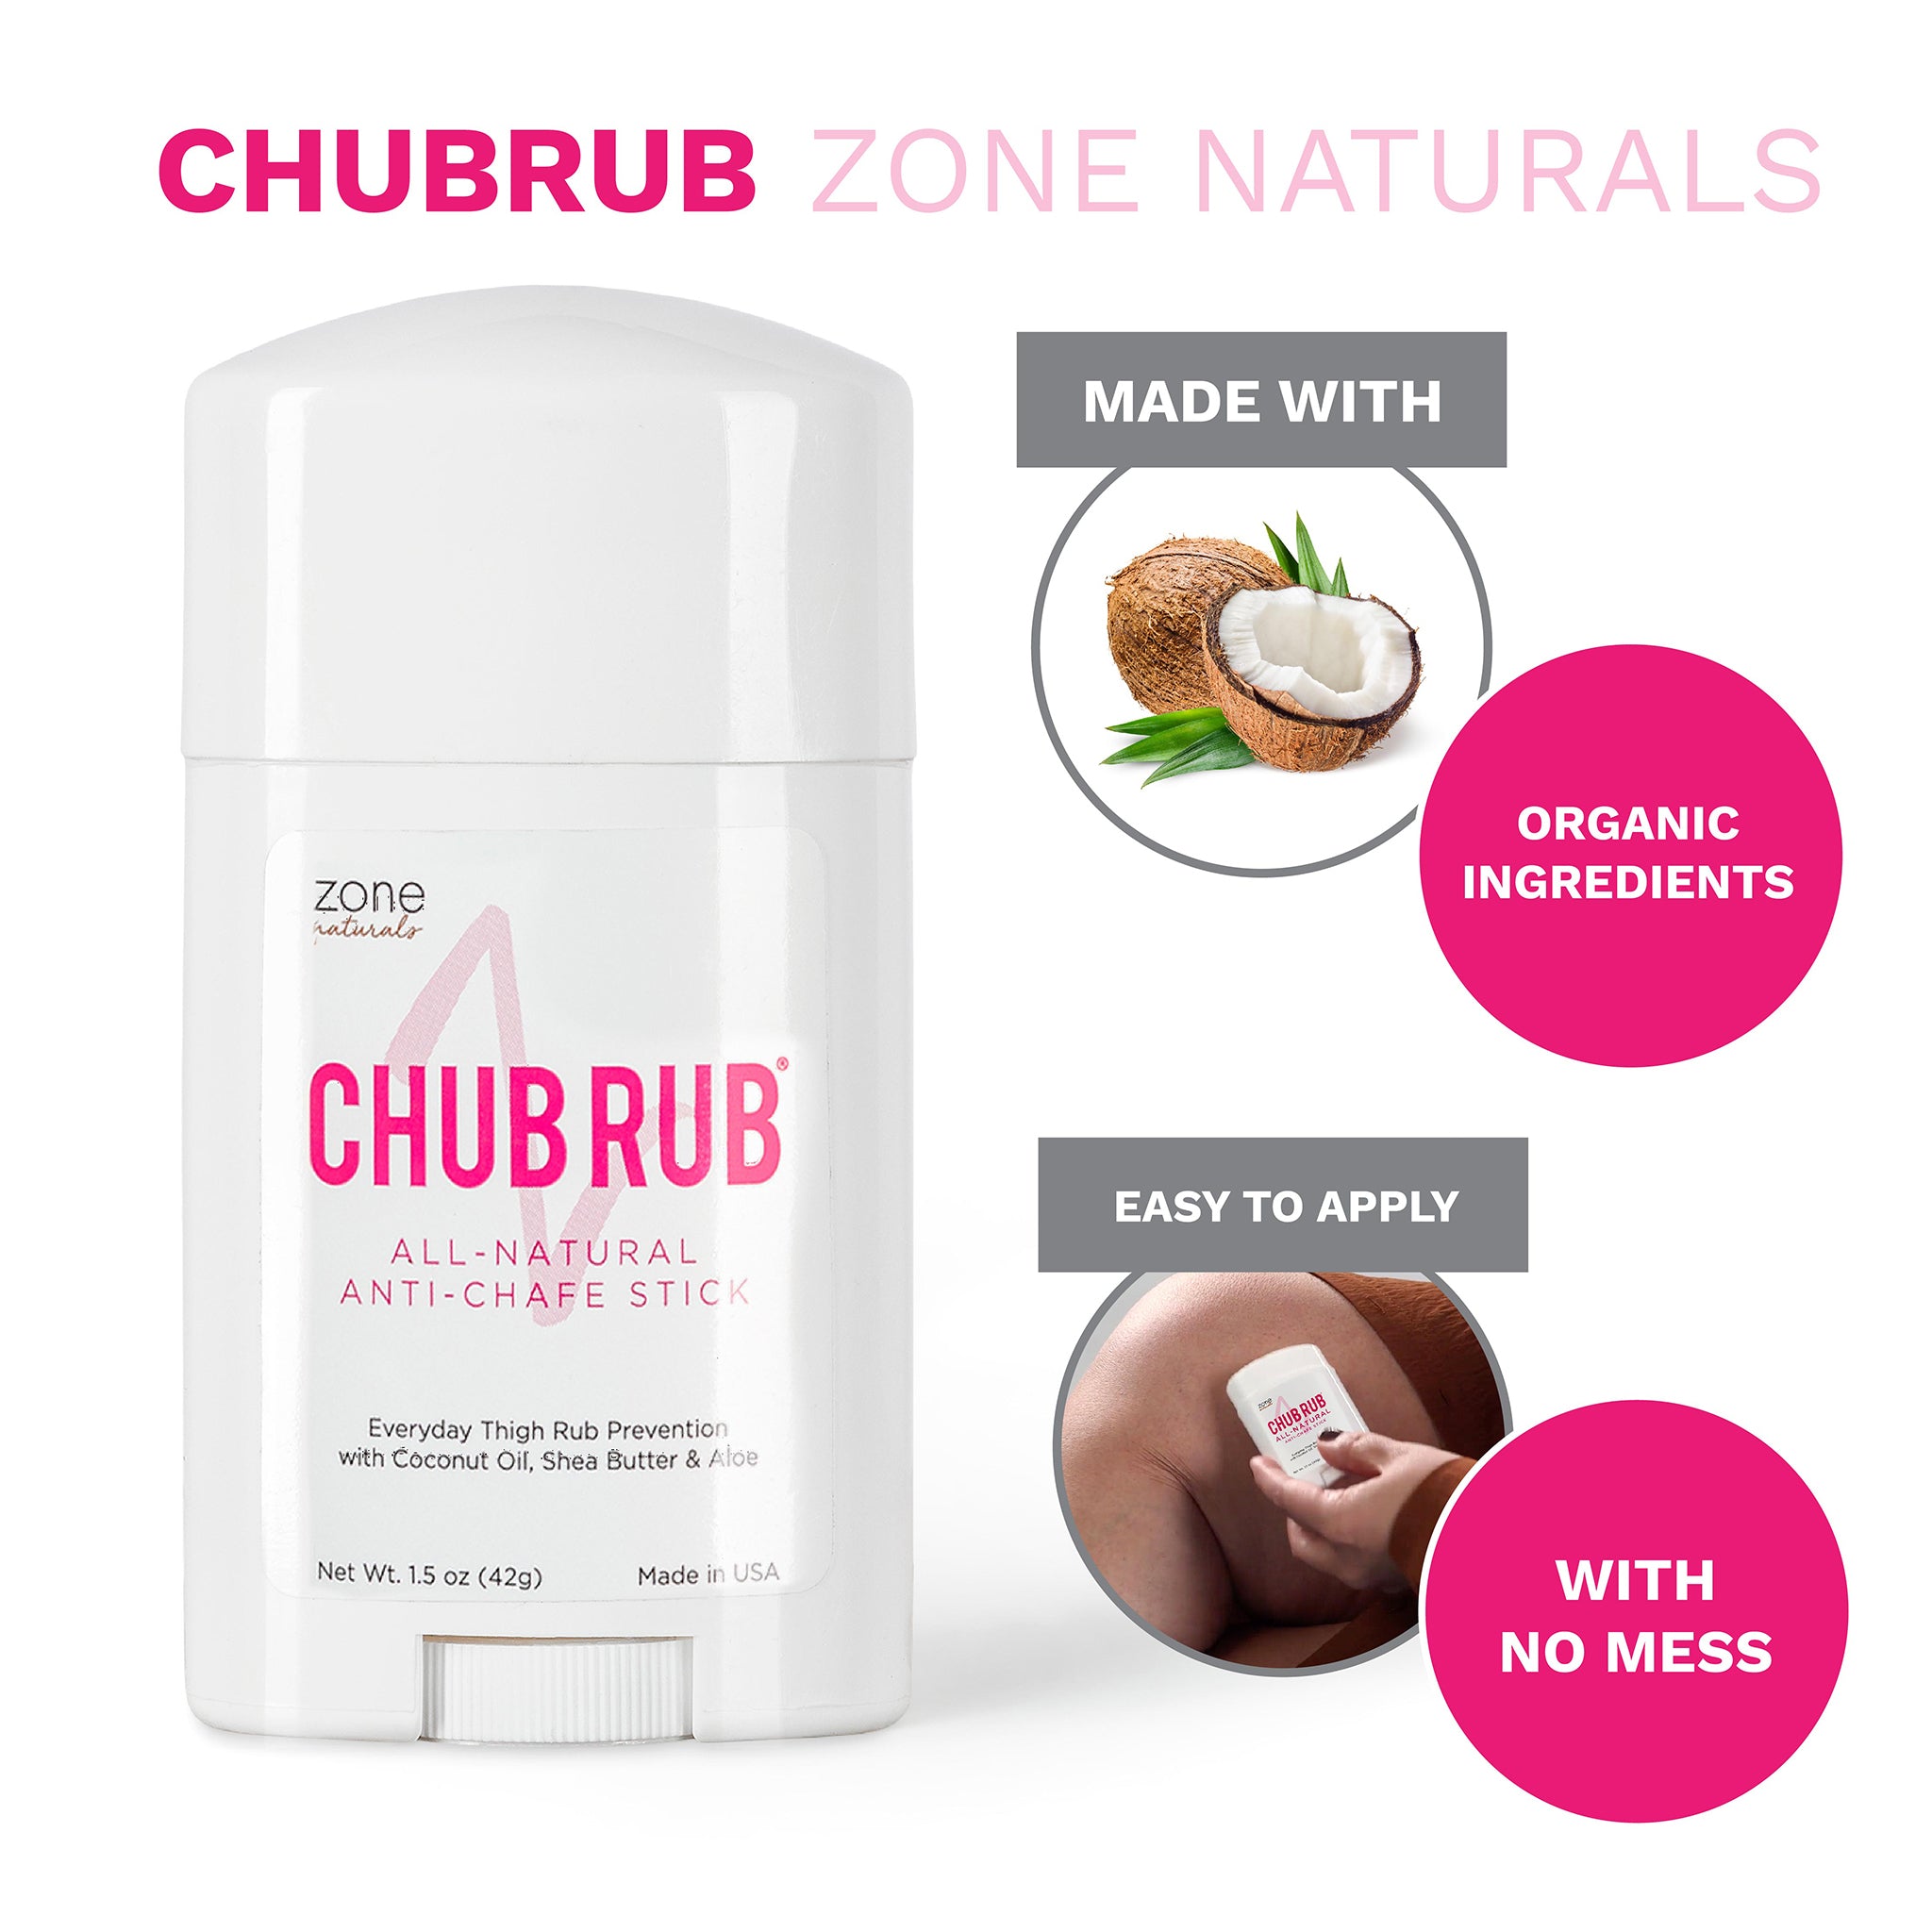 3.99 instead of 6.99 for a Chub Rub Anti Chafing Cream - save up to 43% -  Wowcher